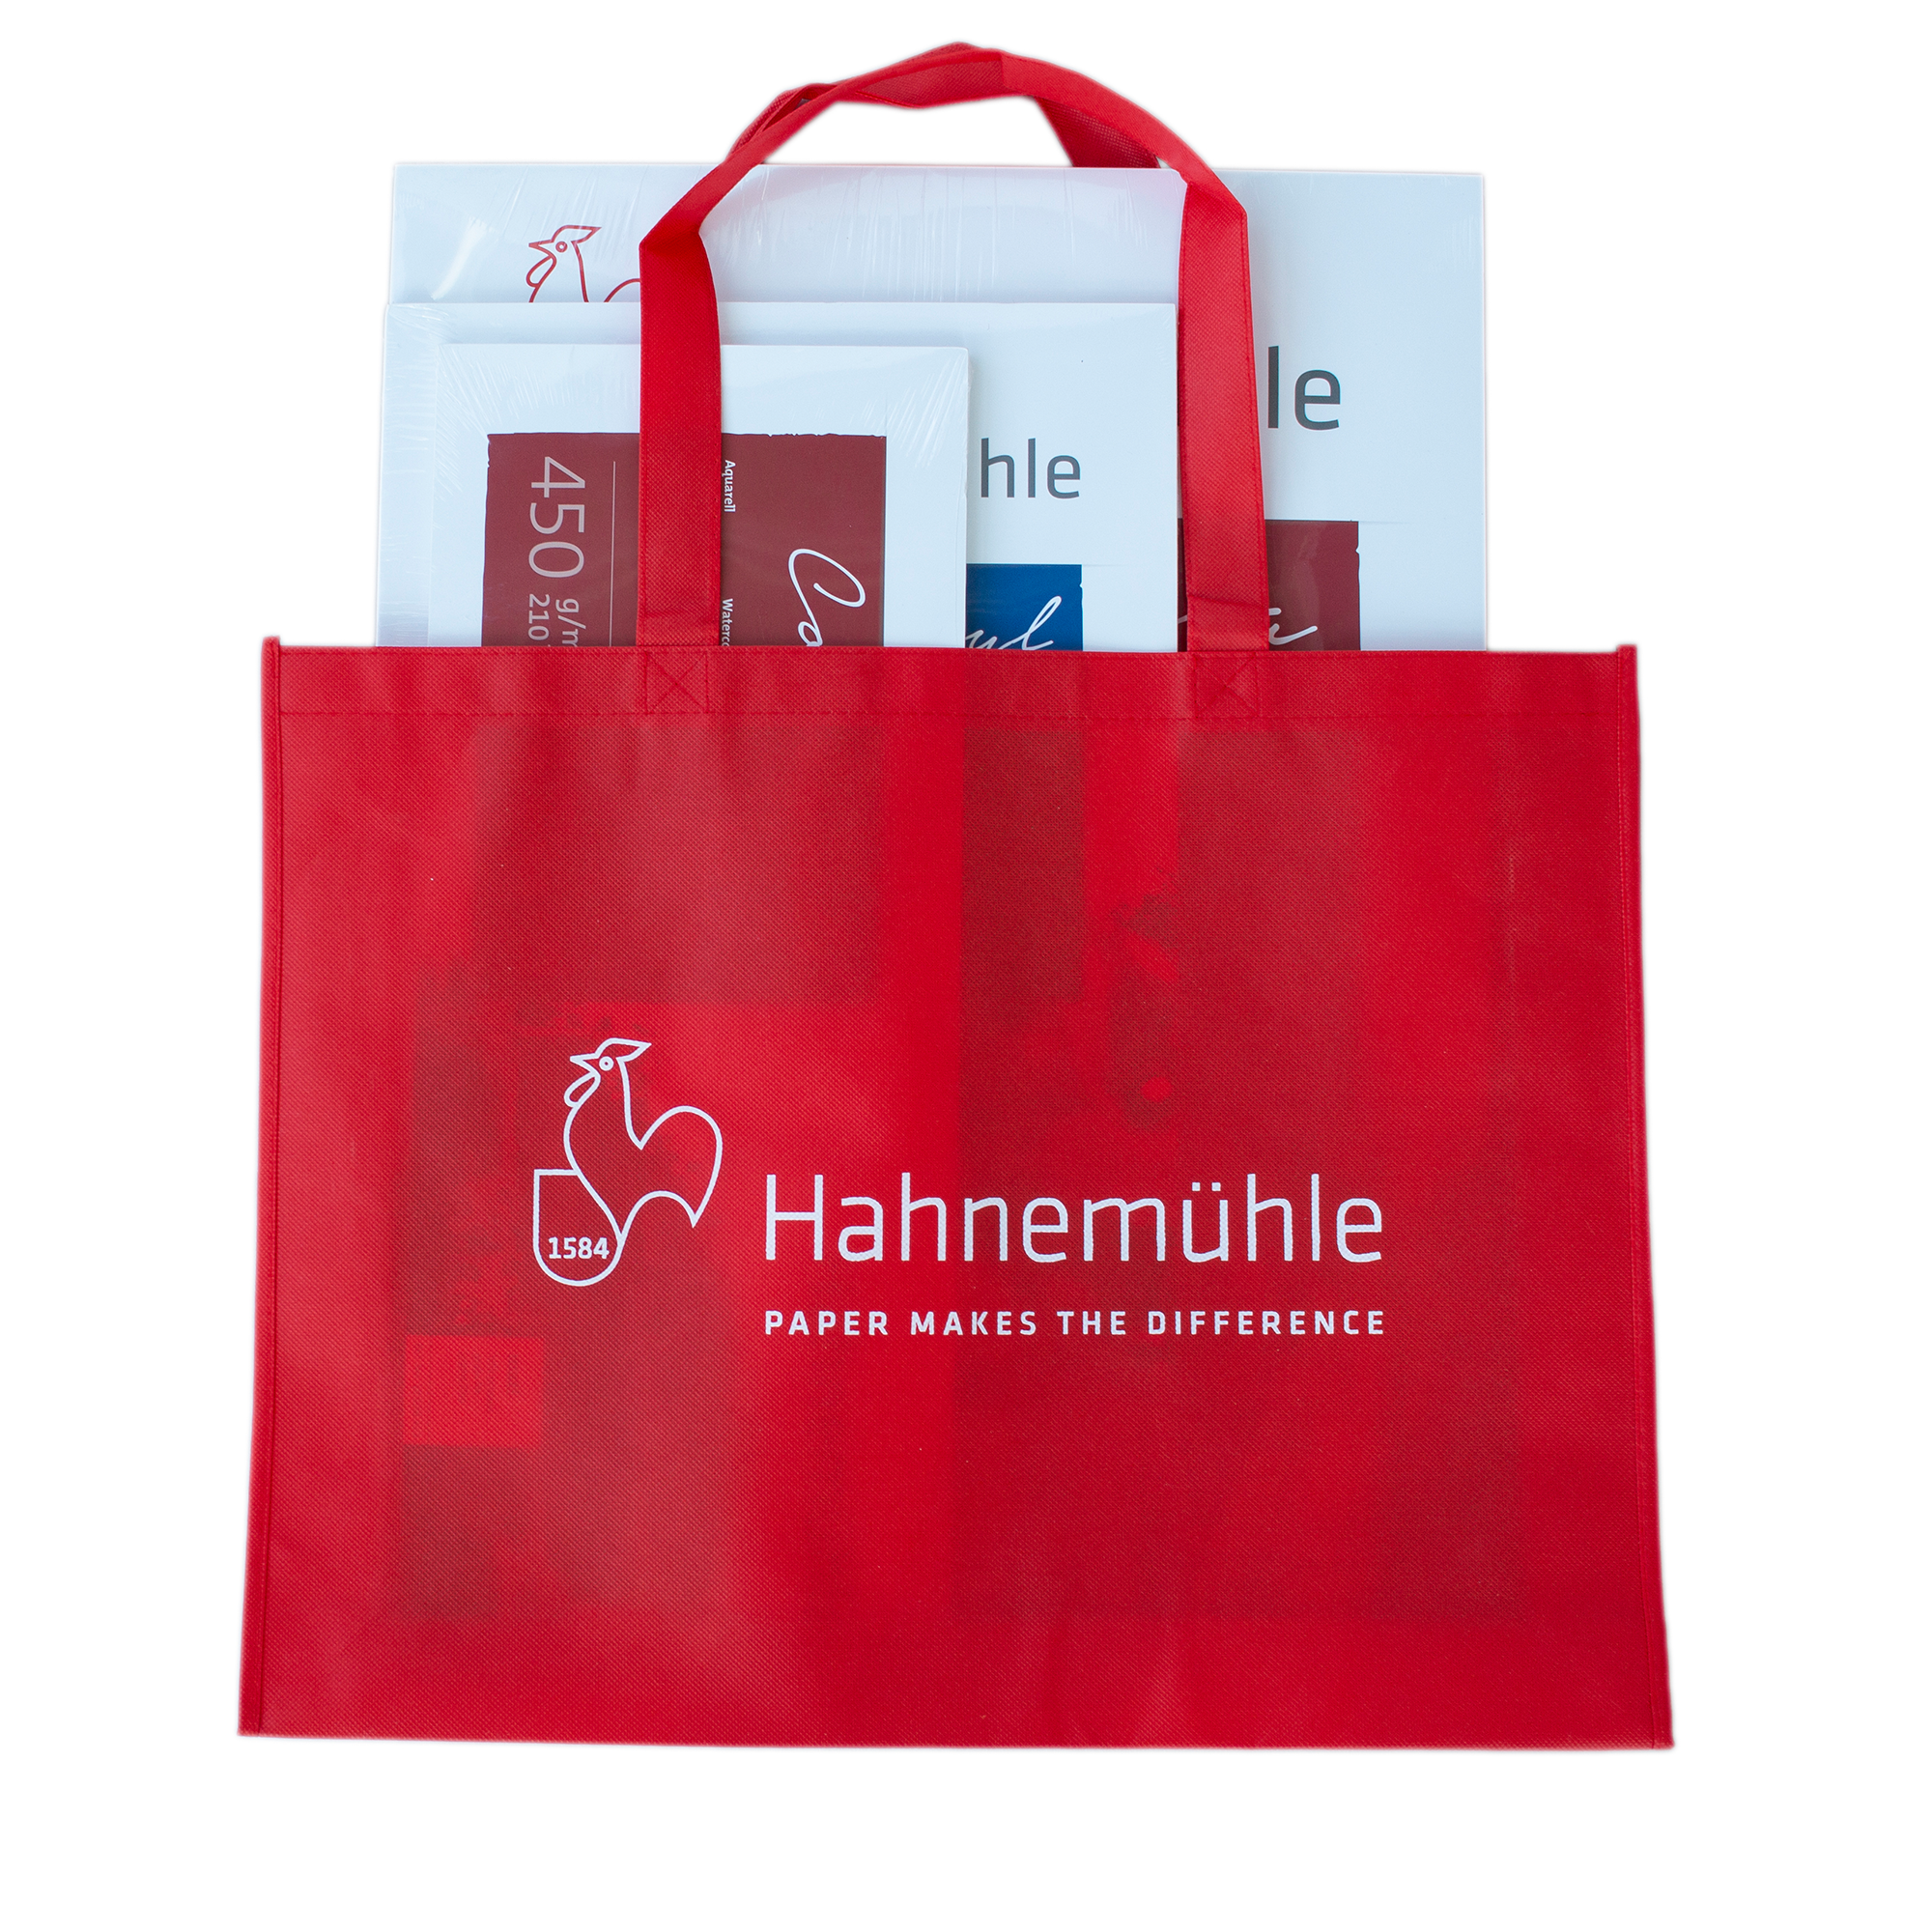 Hahnemühle Carrying bag 52 X 40 X 10cm